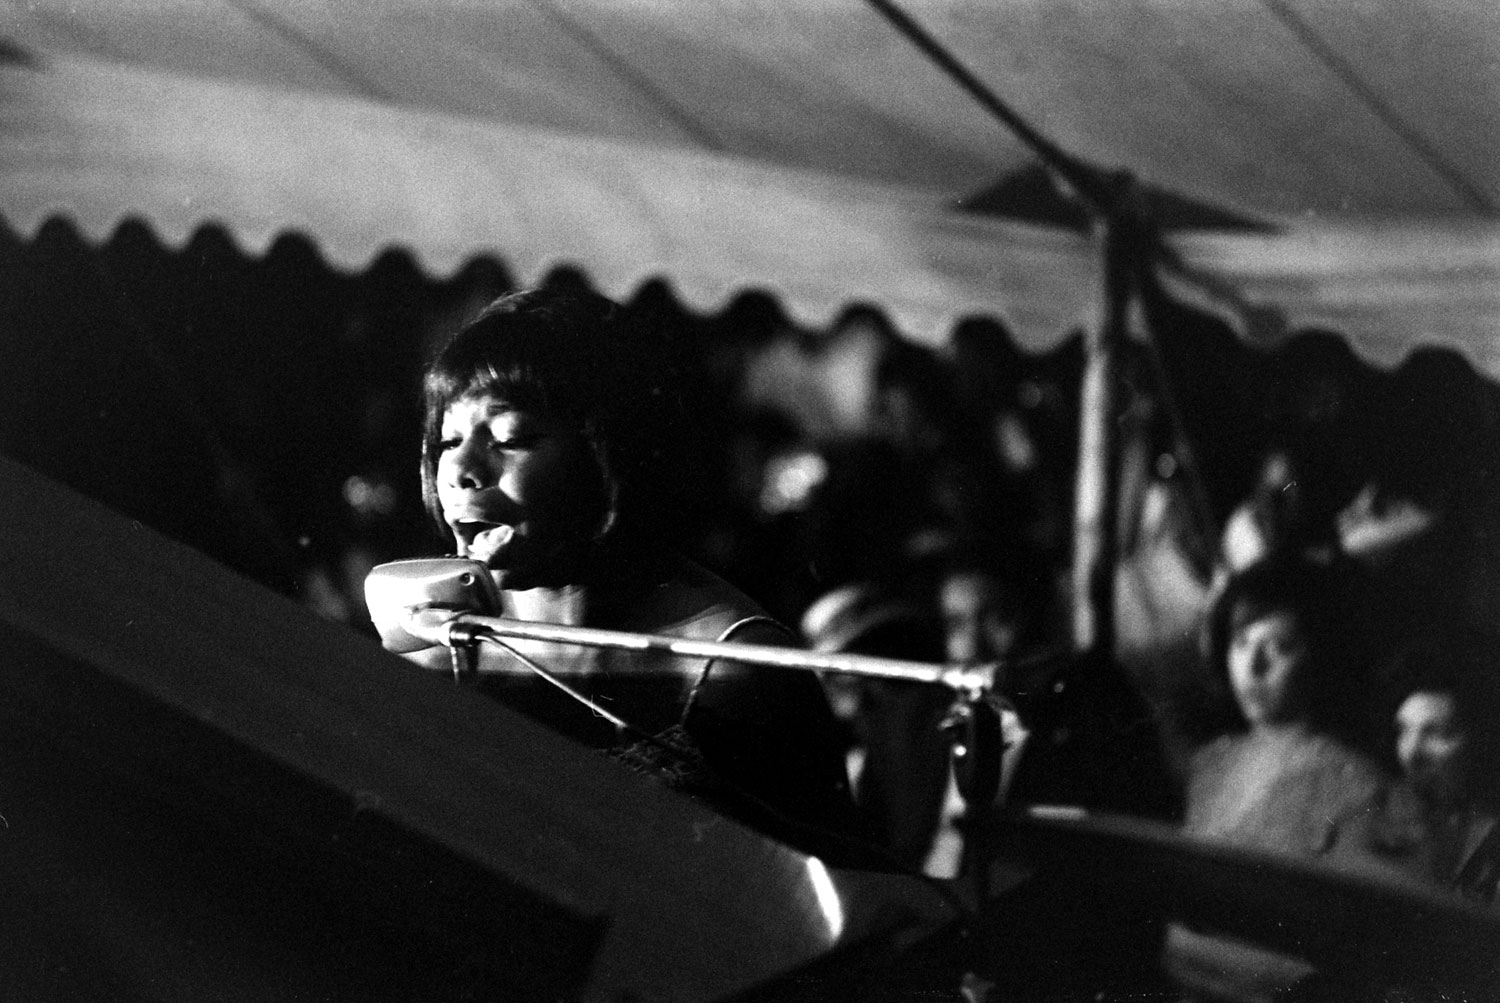 Nina Simone performs during the Salute to Freedom benefit concert in Birmingham, Ala., August 5, 1963.